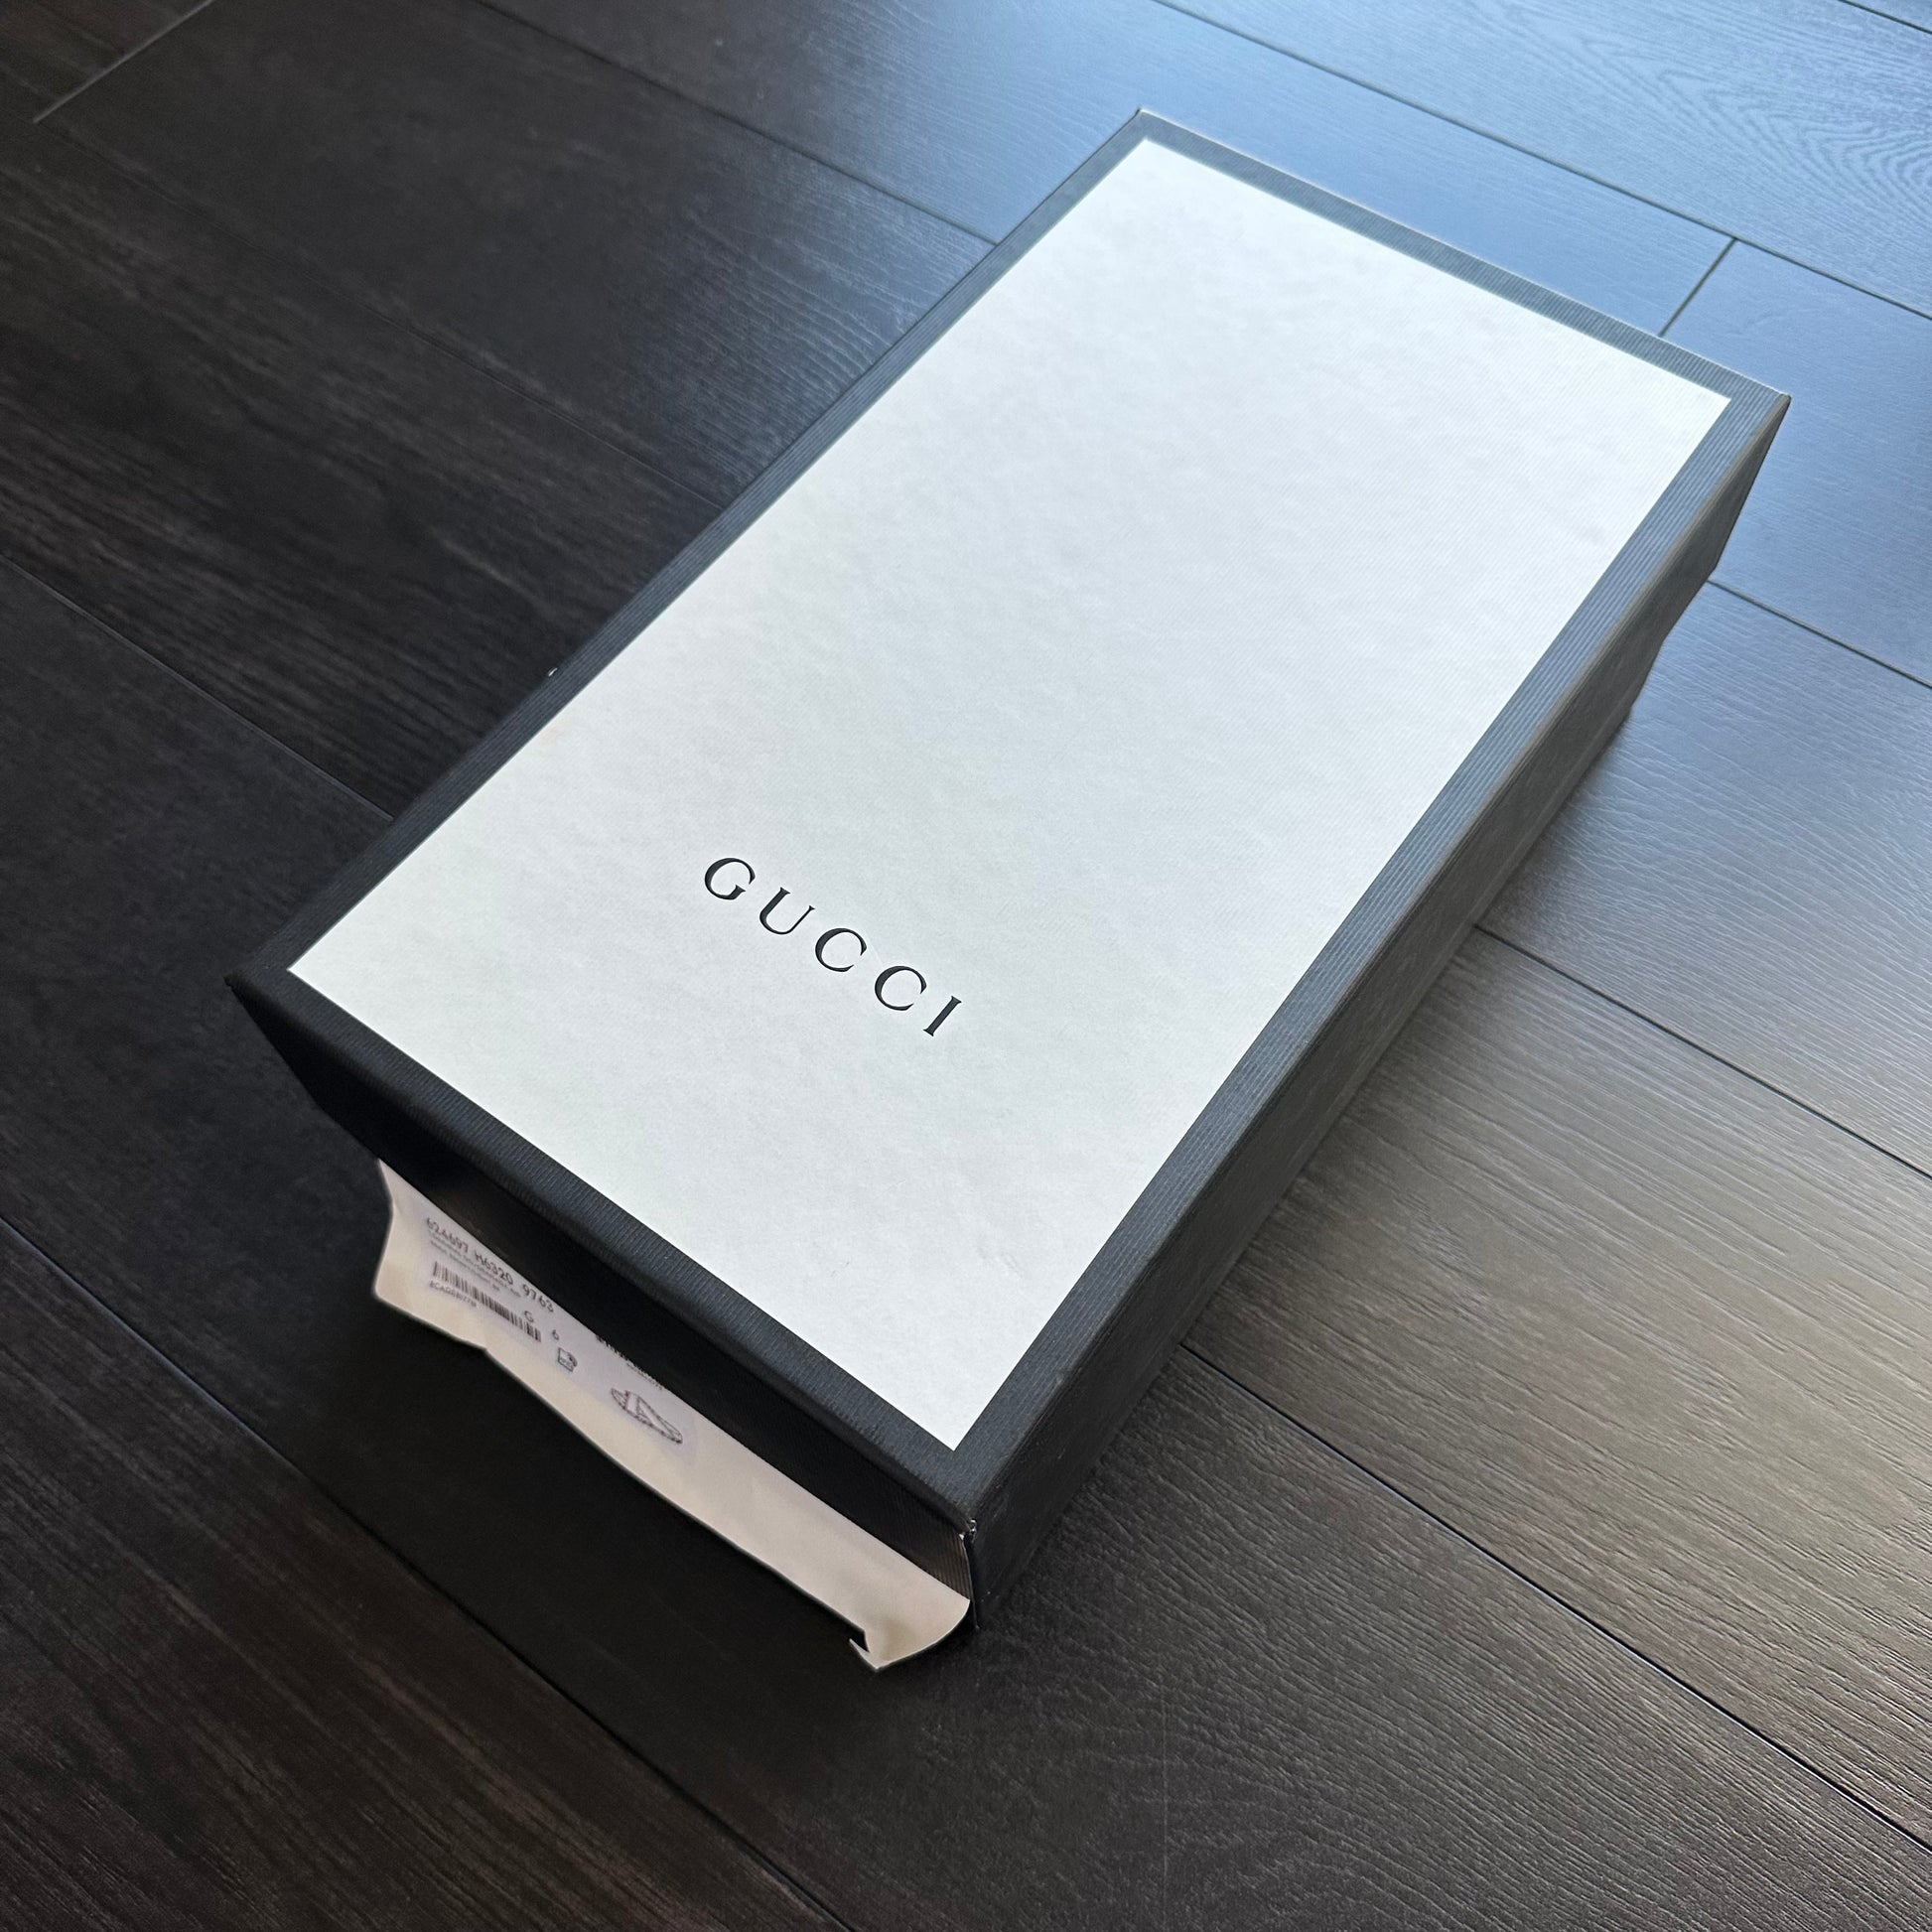 Gucci GG Slide Sandal – Not Your Father's Gear